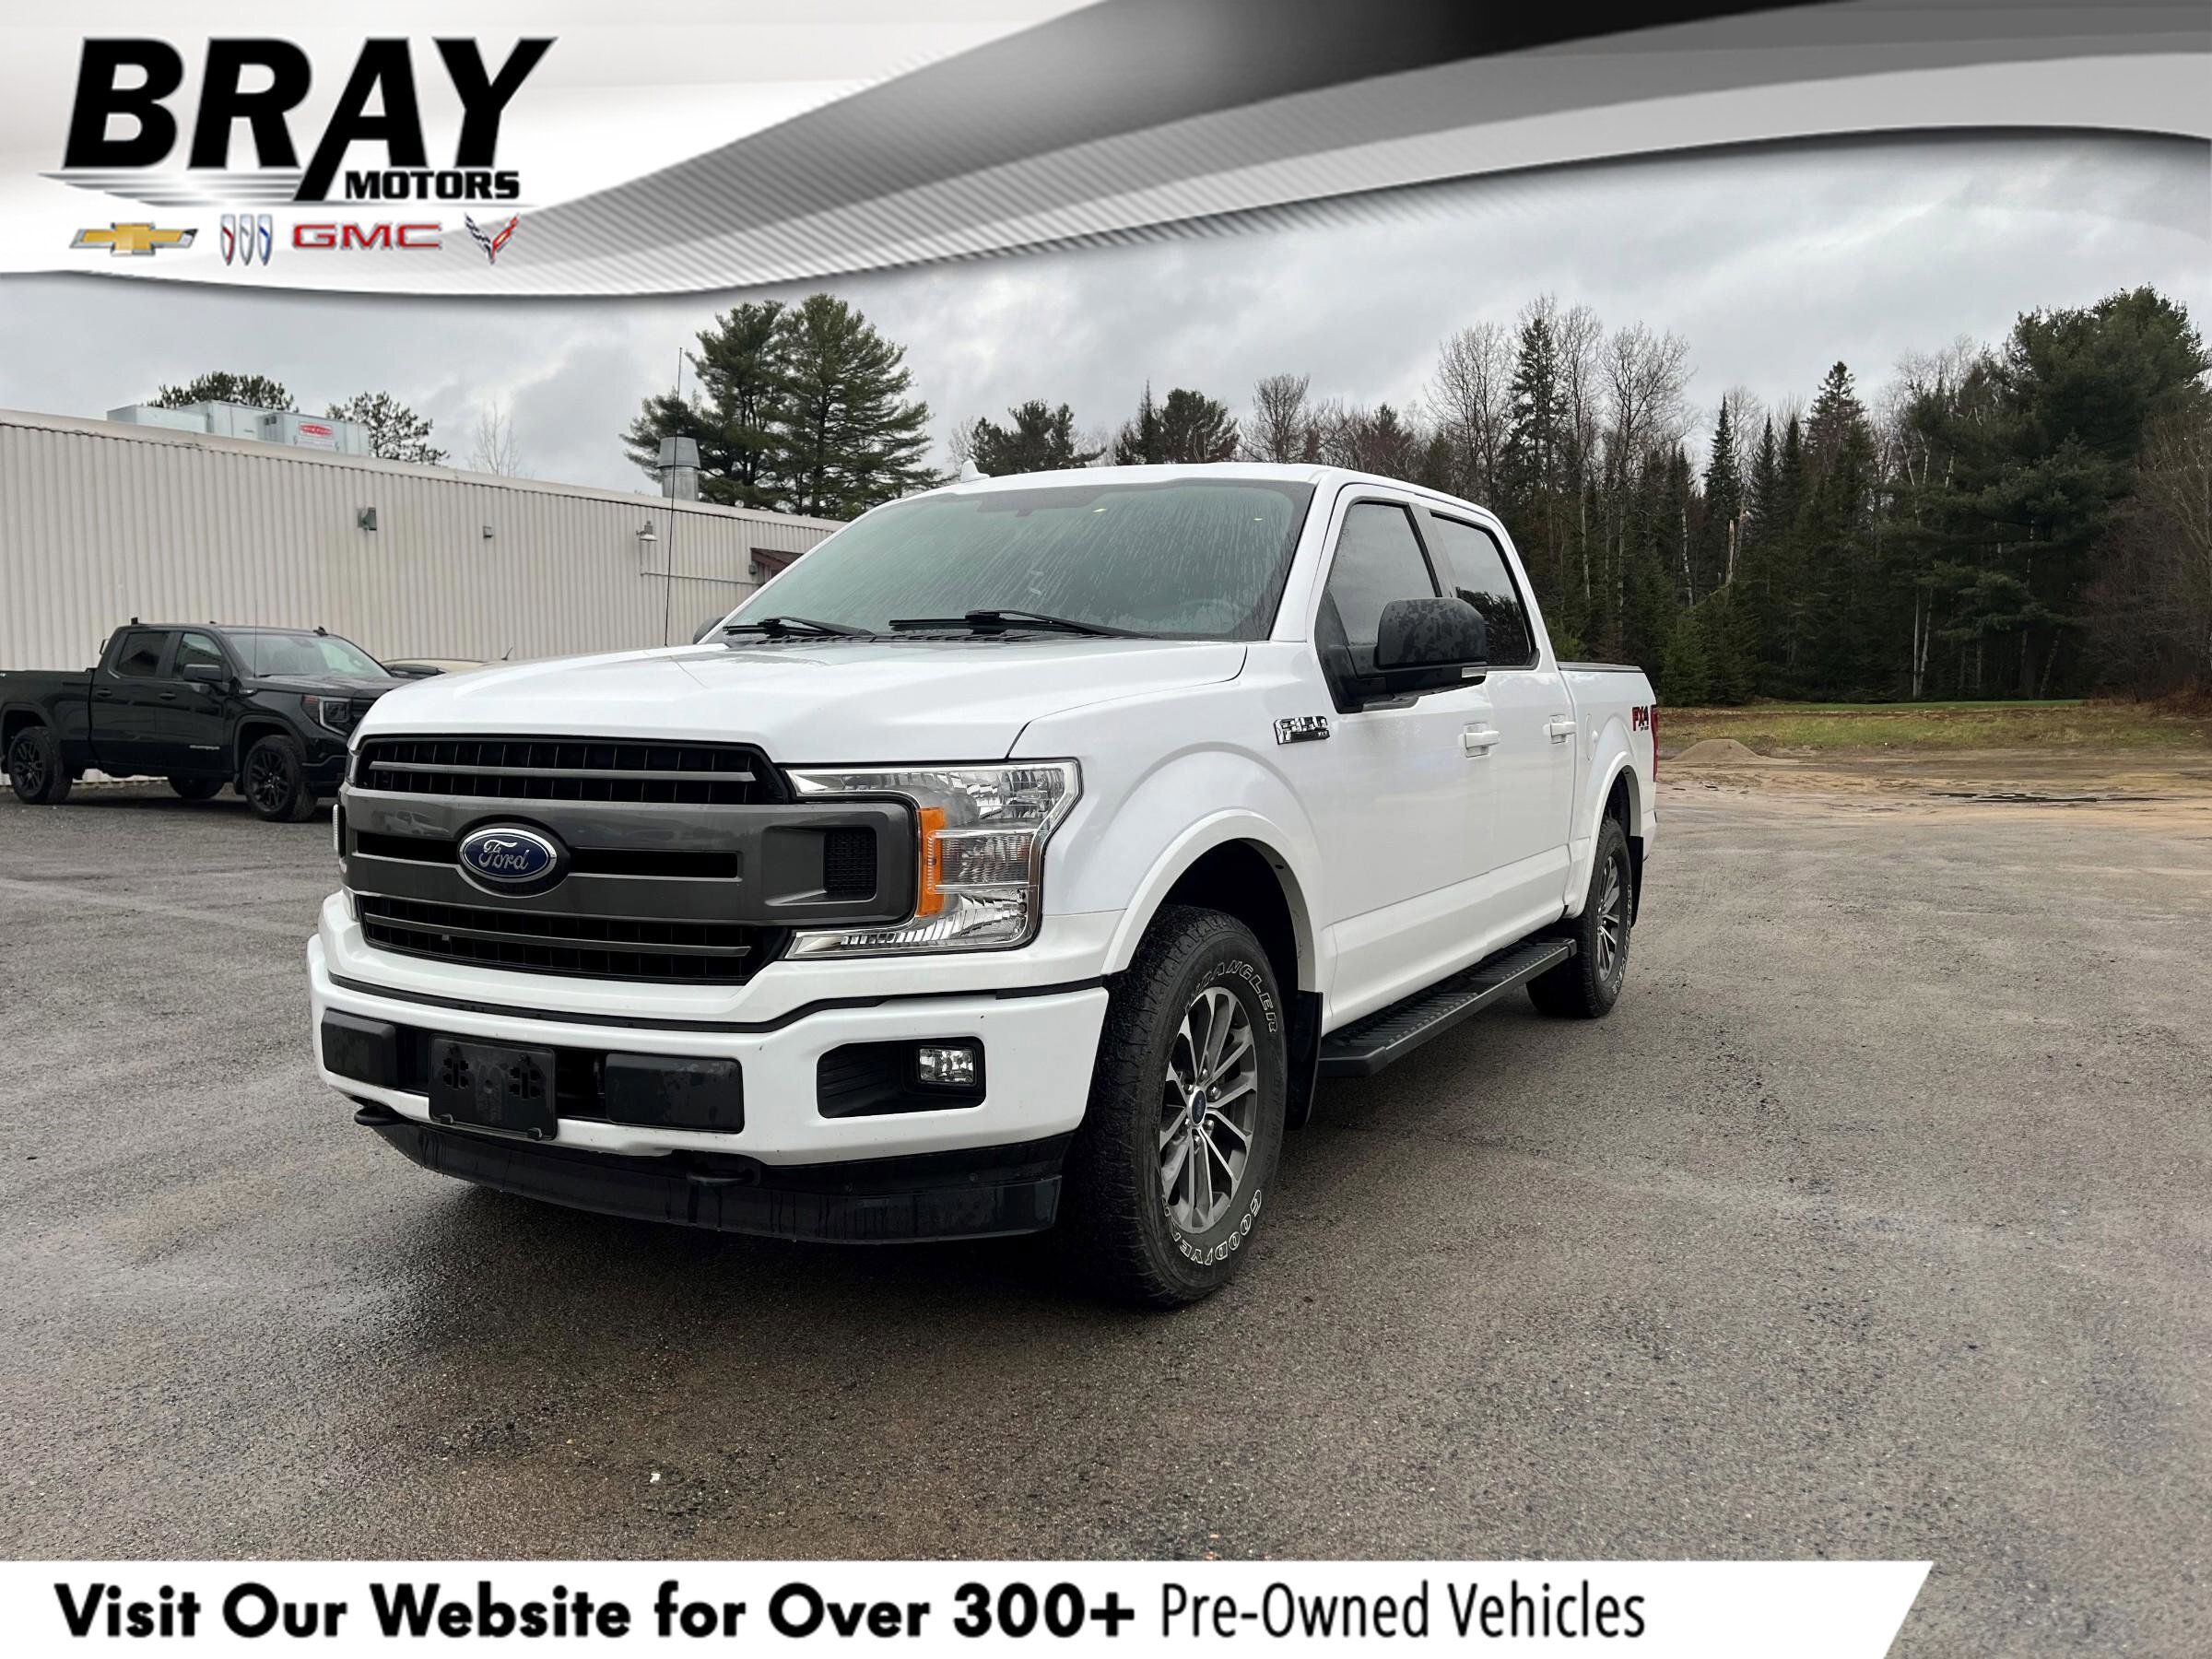 2018 Ford F-150 XLT CERTIFIED PRE-OWNED | 1-OWNER | CLEAN CARFAX